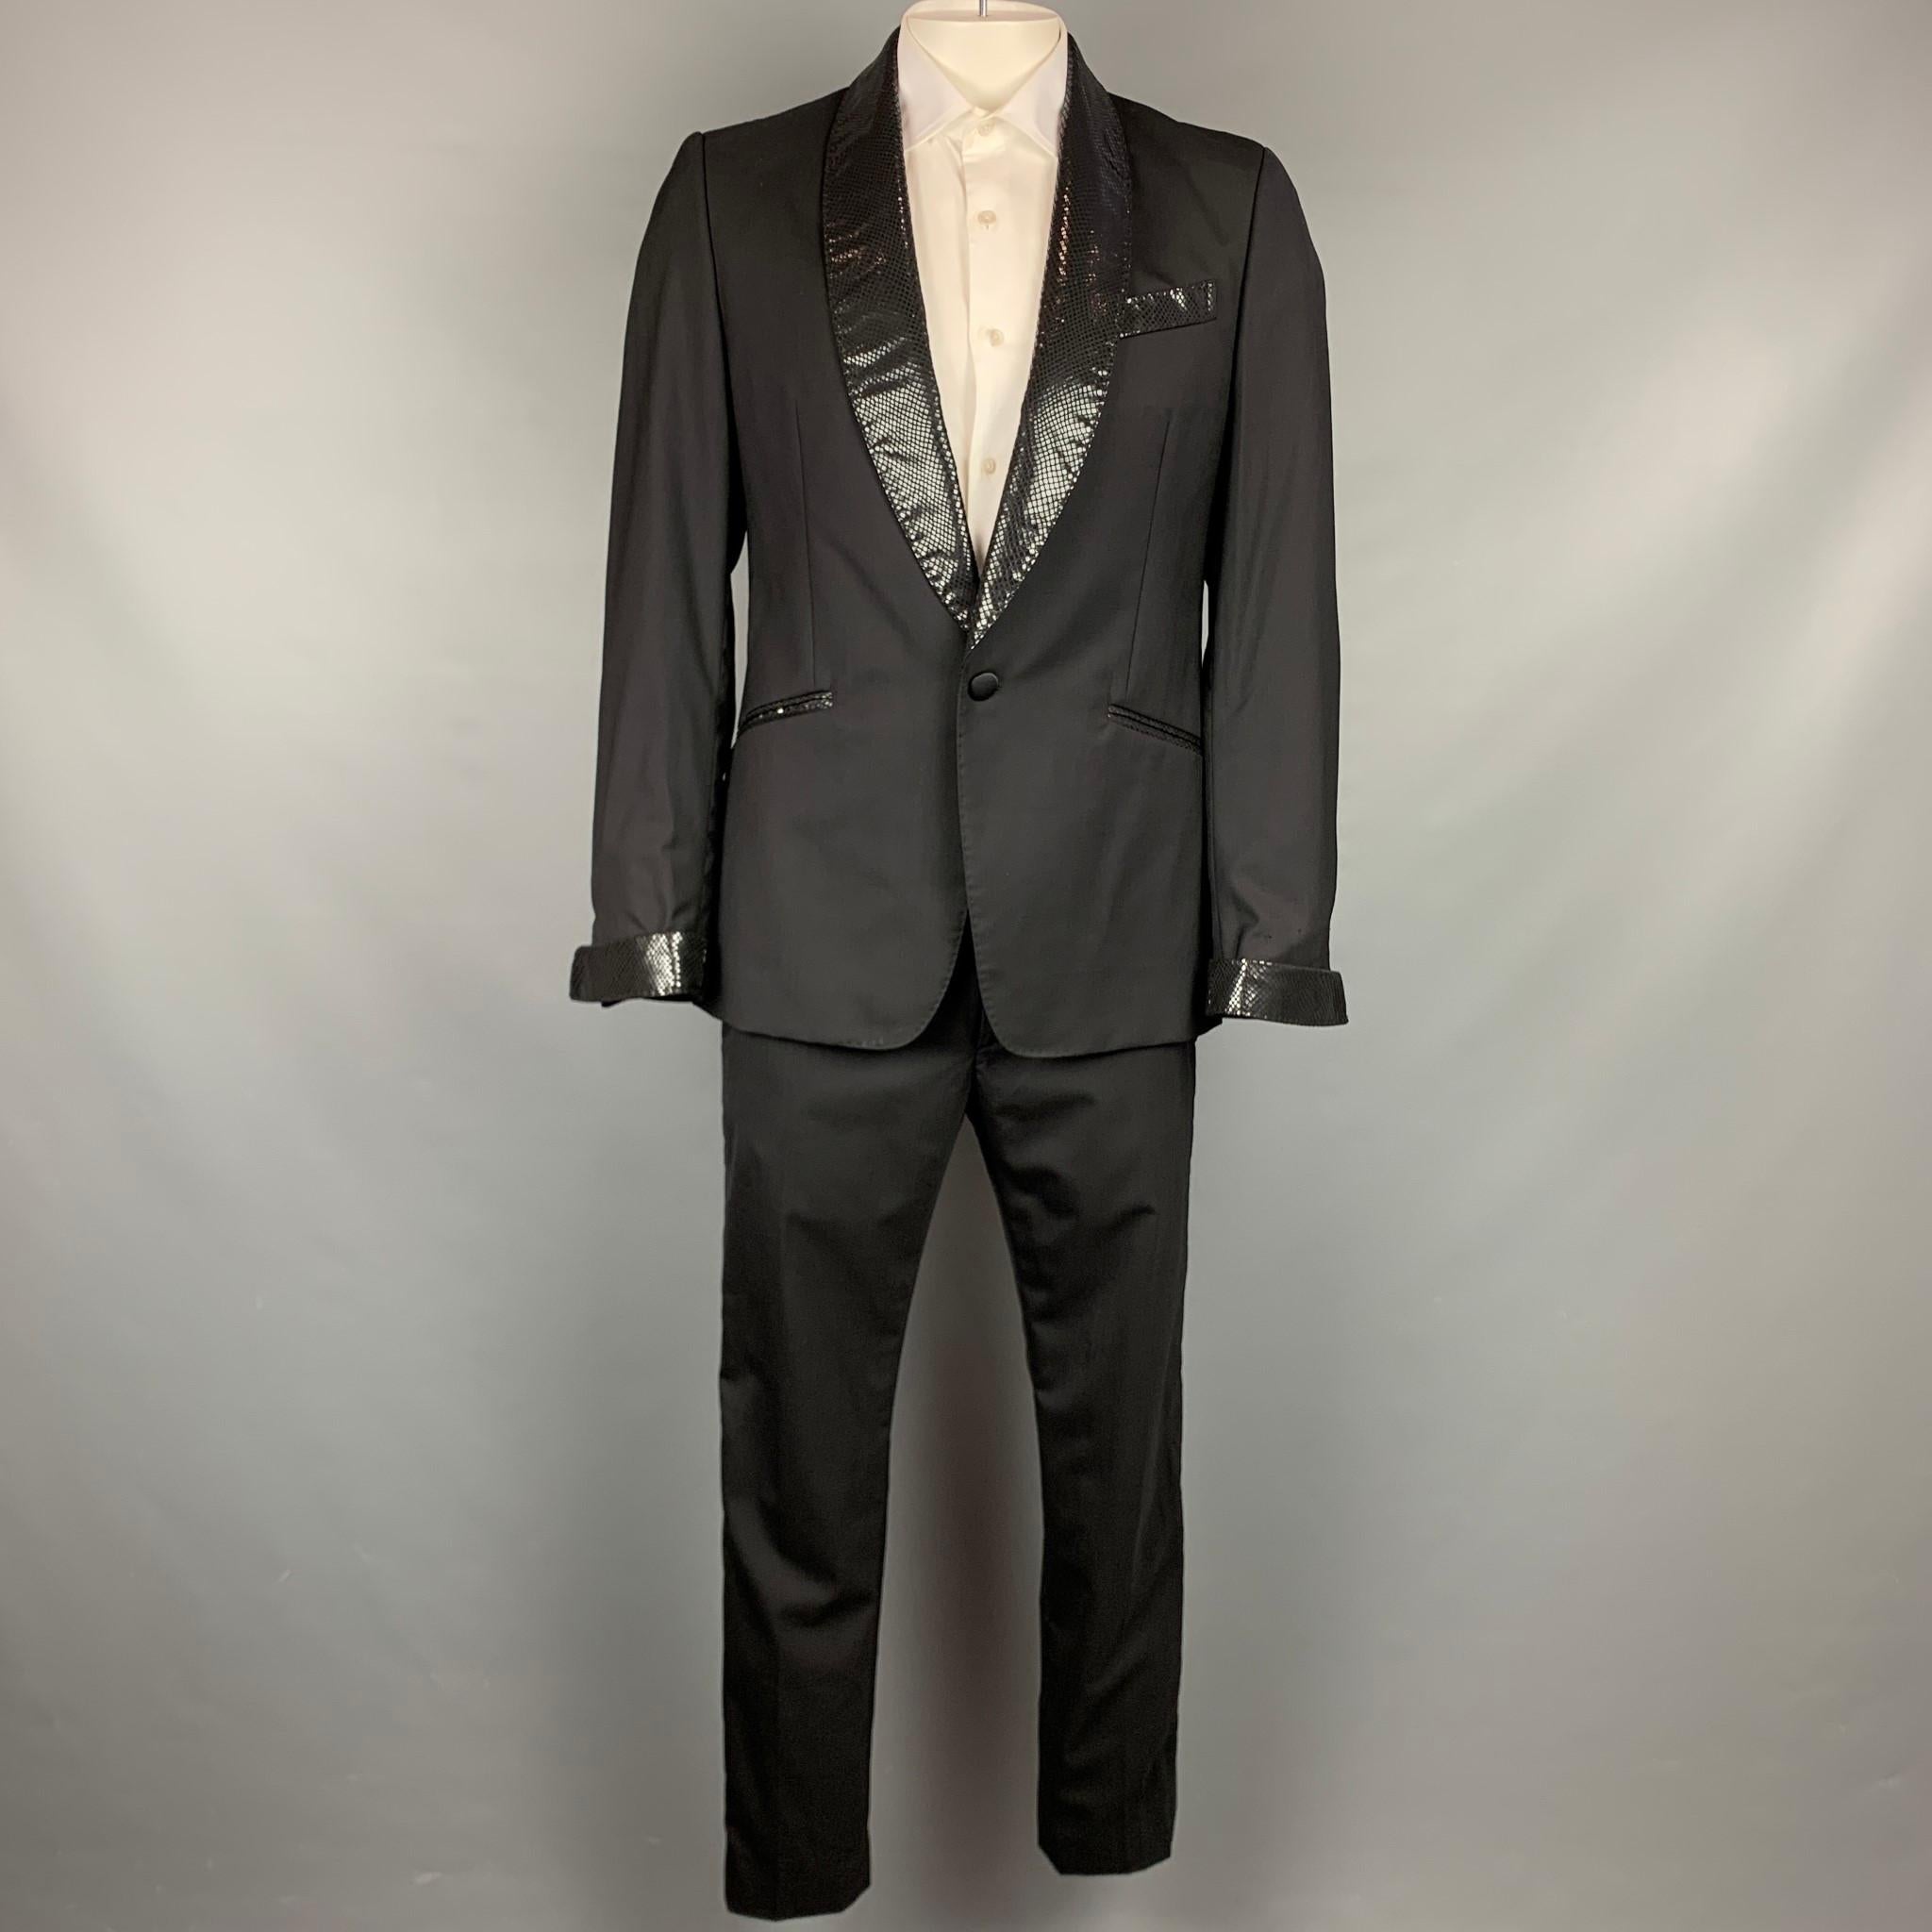 VIVIENNE WESTWOOD MAN suit comes in a black wool with a full liner and includes a slim fit, single breasted,  single button sport coat with shal collar and matching flat front trousers. Made in Italy.

Excellent Pre-Owned Condition.
Marked: Jacket: